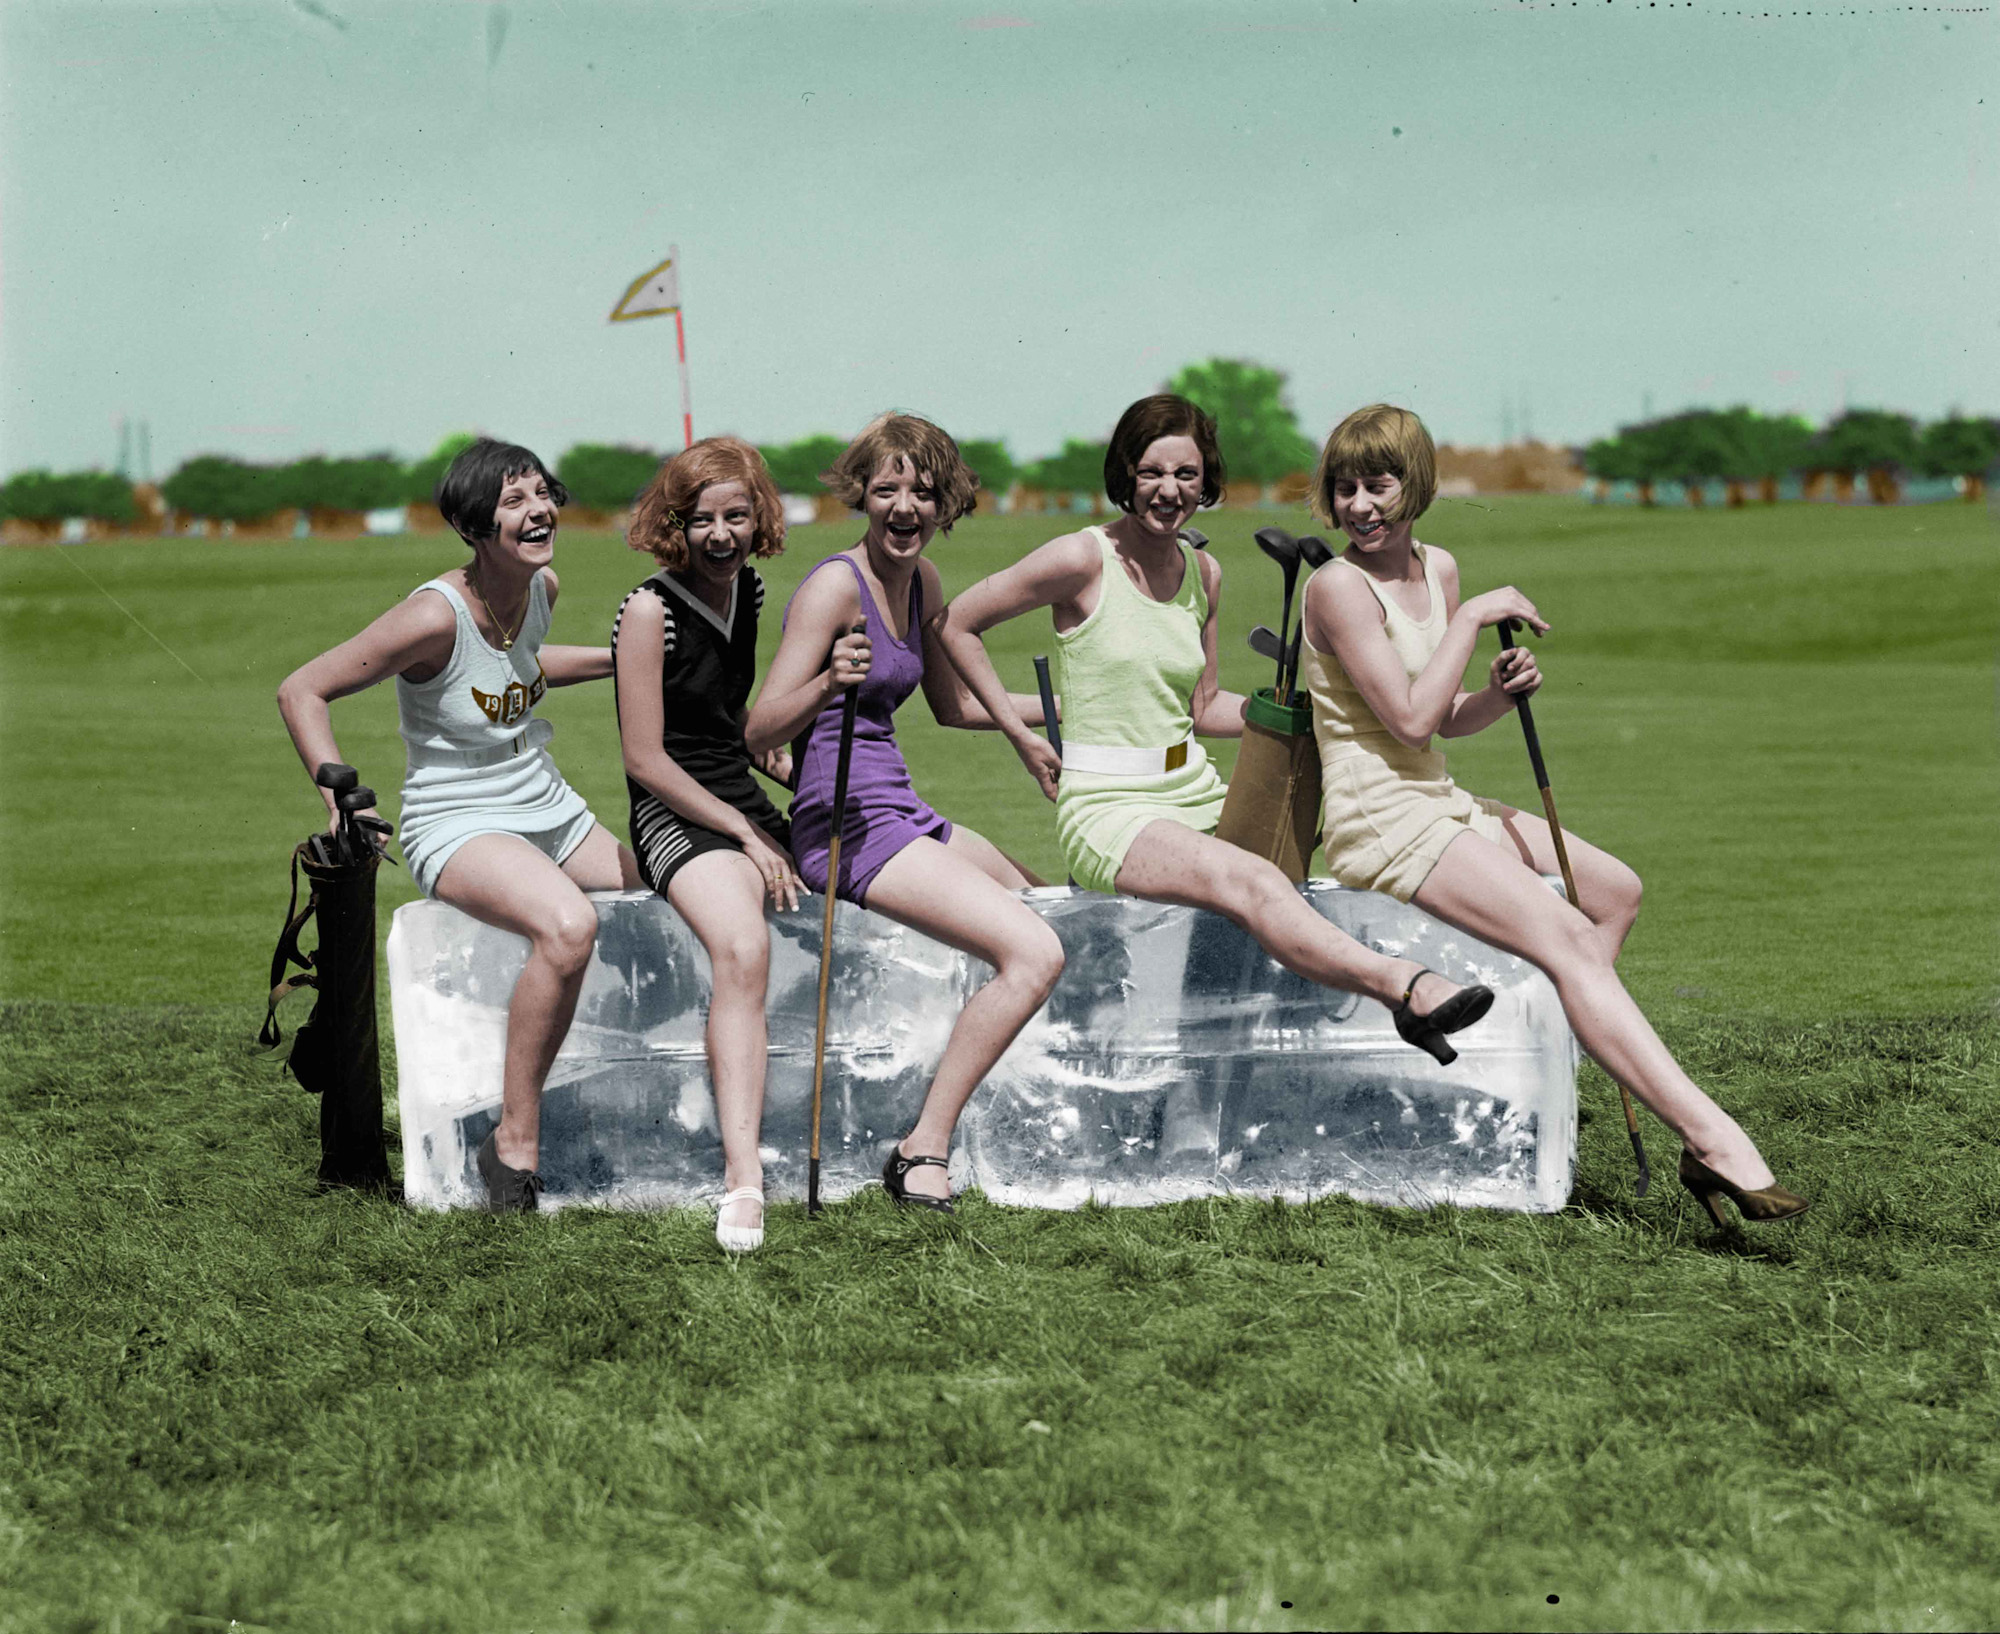 Black and white colorized by me. Taken July 9, 1926 by National Photo Co. Identified in another photo as Elaine Griggs, Virginia Hunter, Mary Kaminsky, Dorothy Kelly and Hazel Brown. View full size.